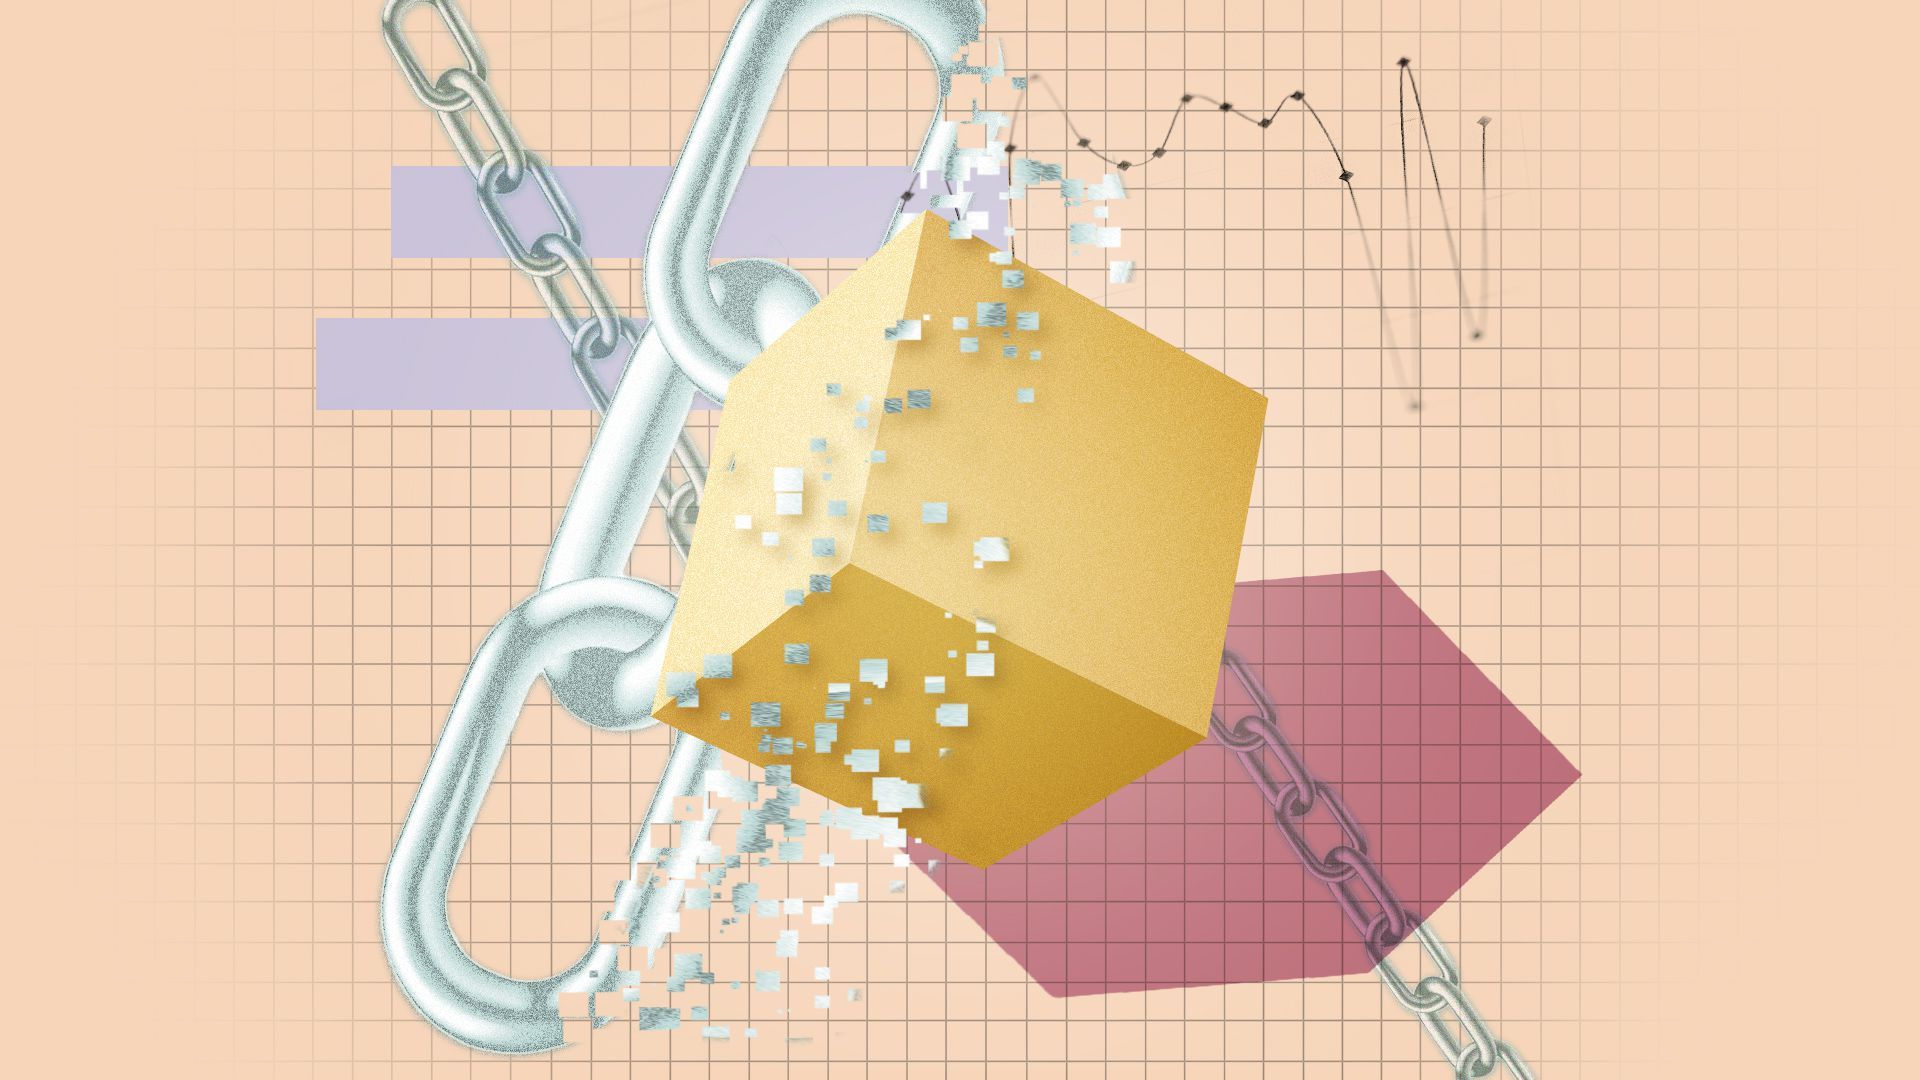 Illustration of a large glowing cube, three chains with one pixelated, assorted shapes, and a graph over a grid.